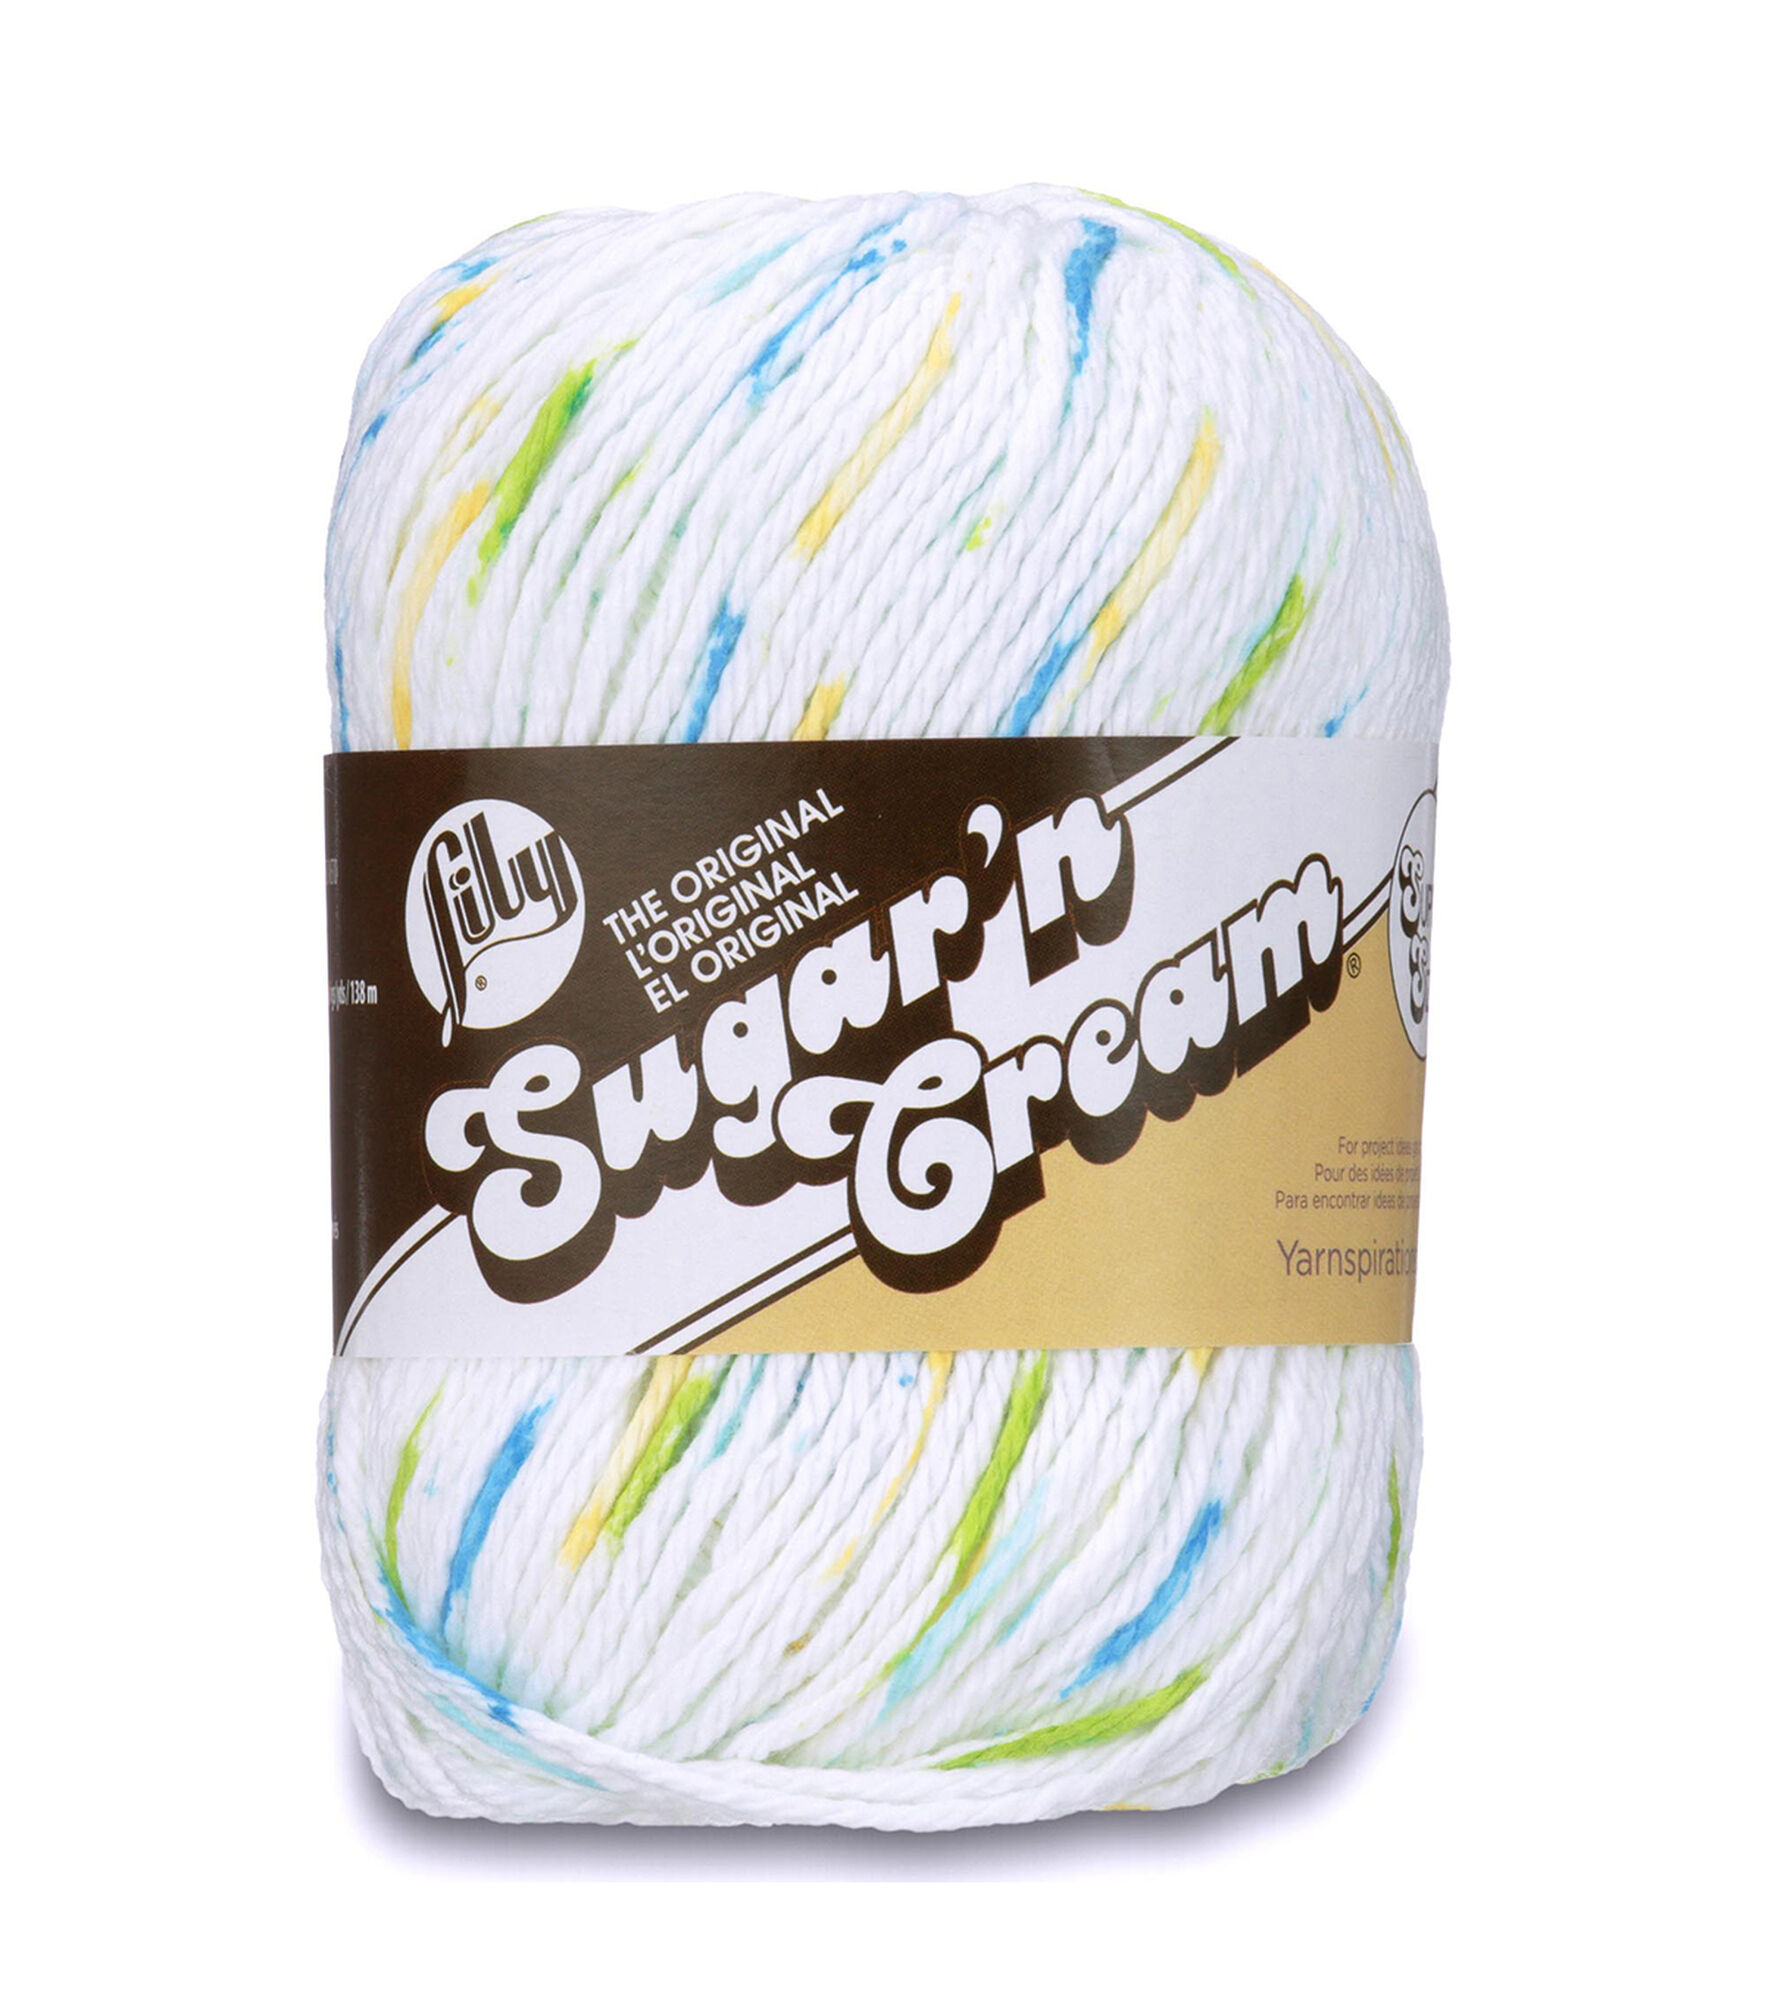 Lily Sugar'n Cream Ombres Super Size 200yds Worsted Cotton Yarn, Summer Prints, hi-res